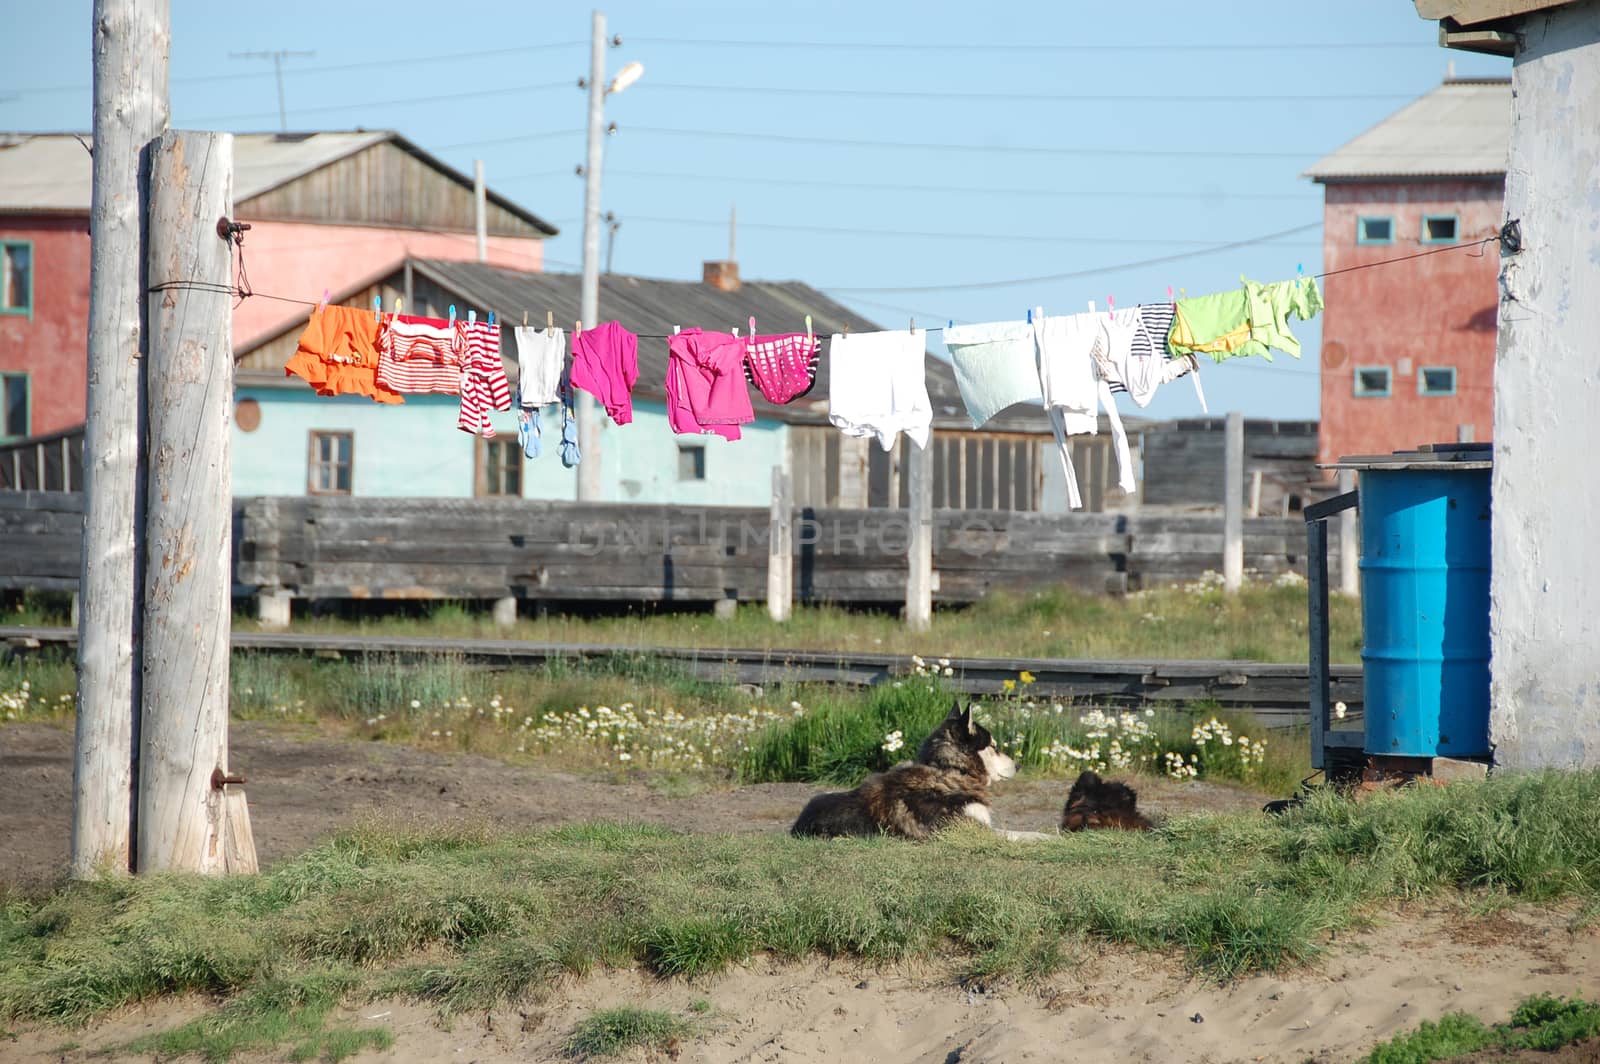 Dog under clothes drying on line at Ayon Island, Chukotka, Russia